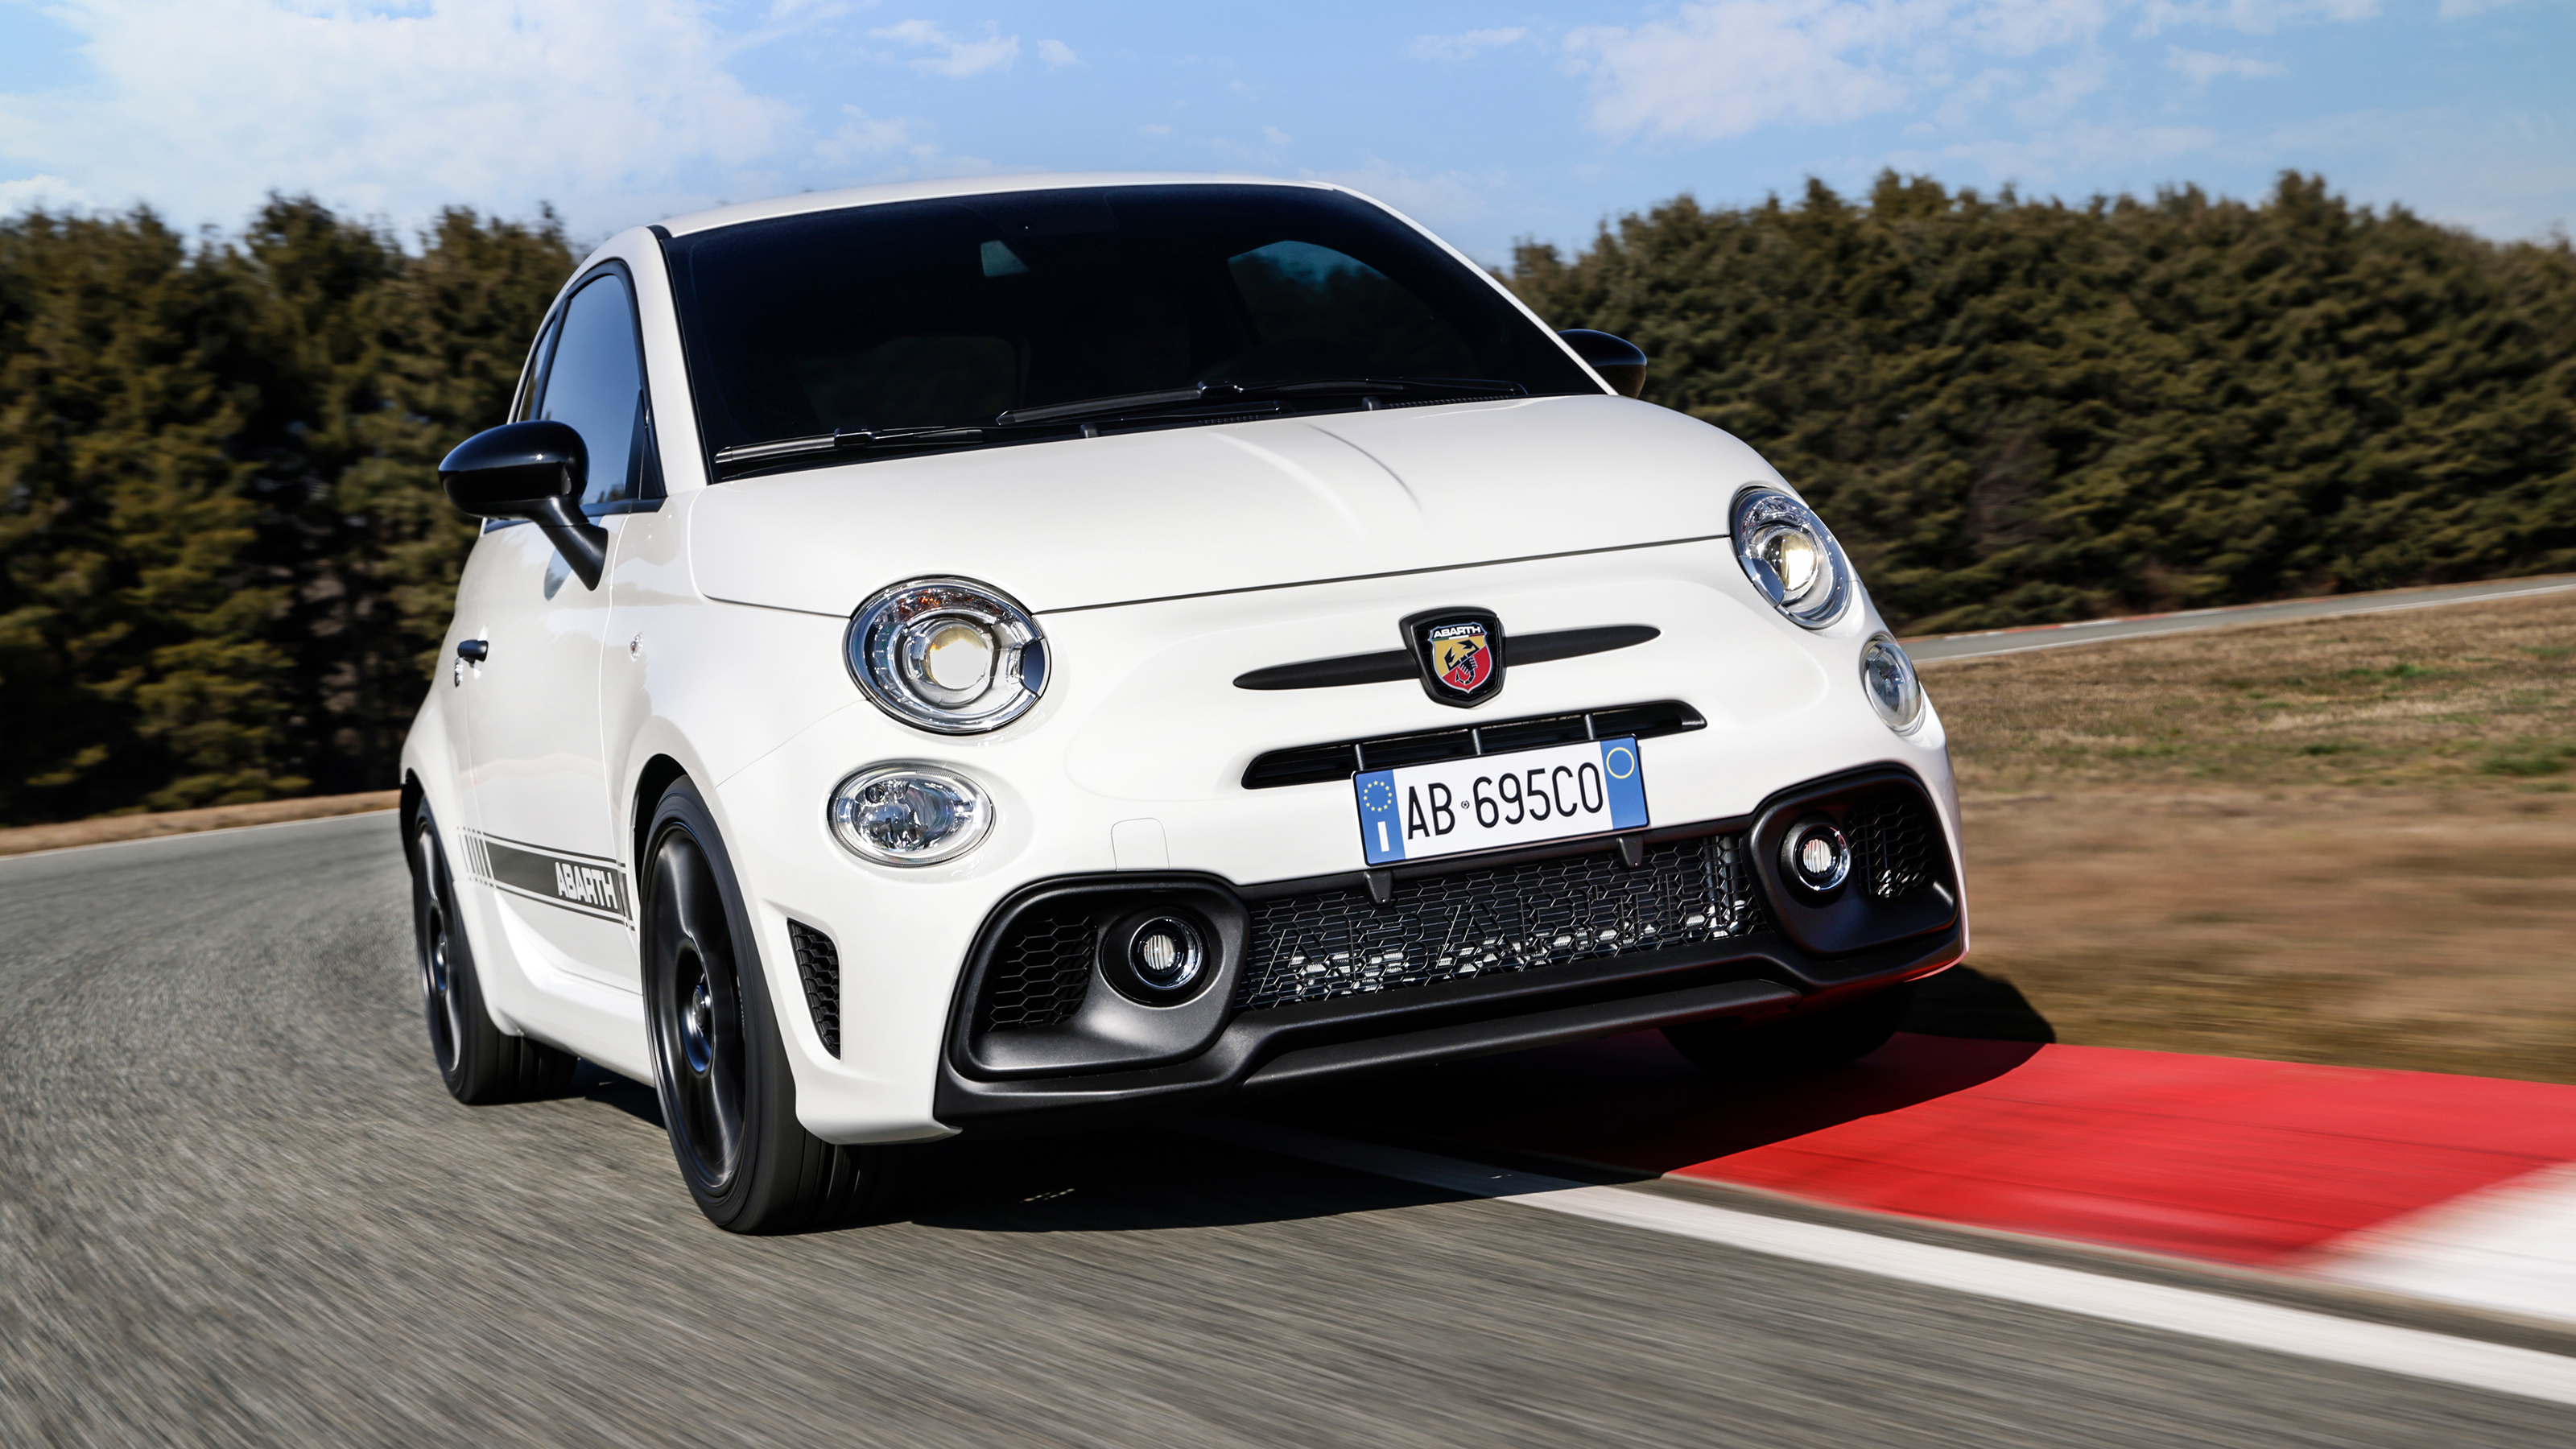 https://mediacloud.carbuyer.co.uk/image/private/s--niwtXno2--/v1647609582/autoexpress/2022/03/2022%20Abarth%20updates-2.jpg